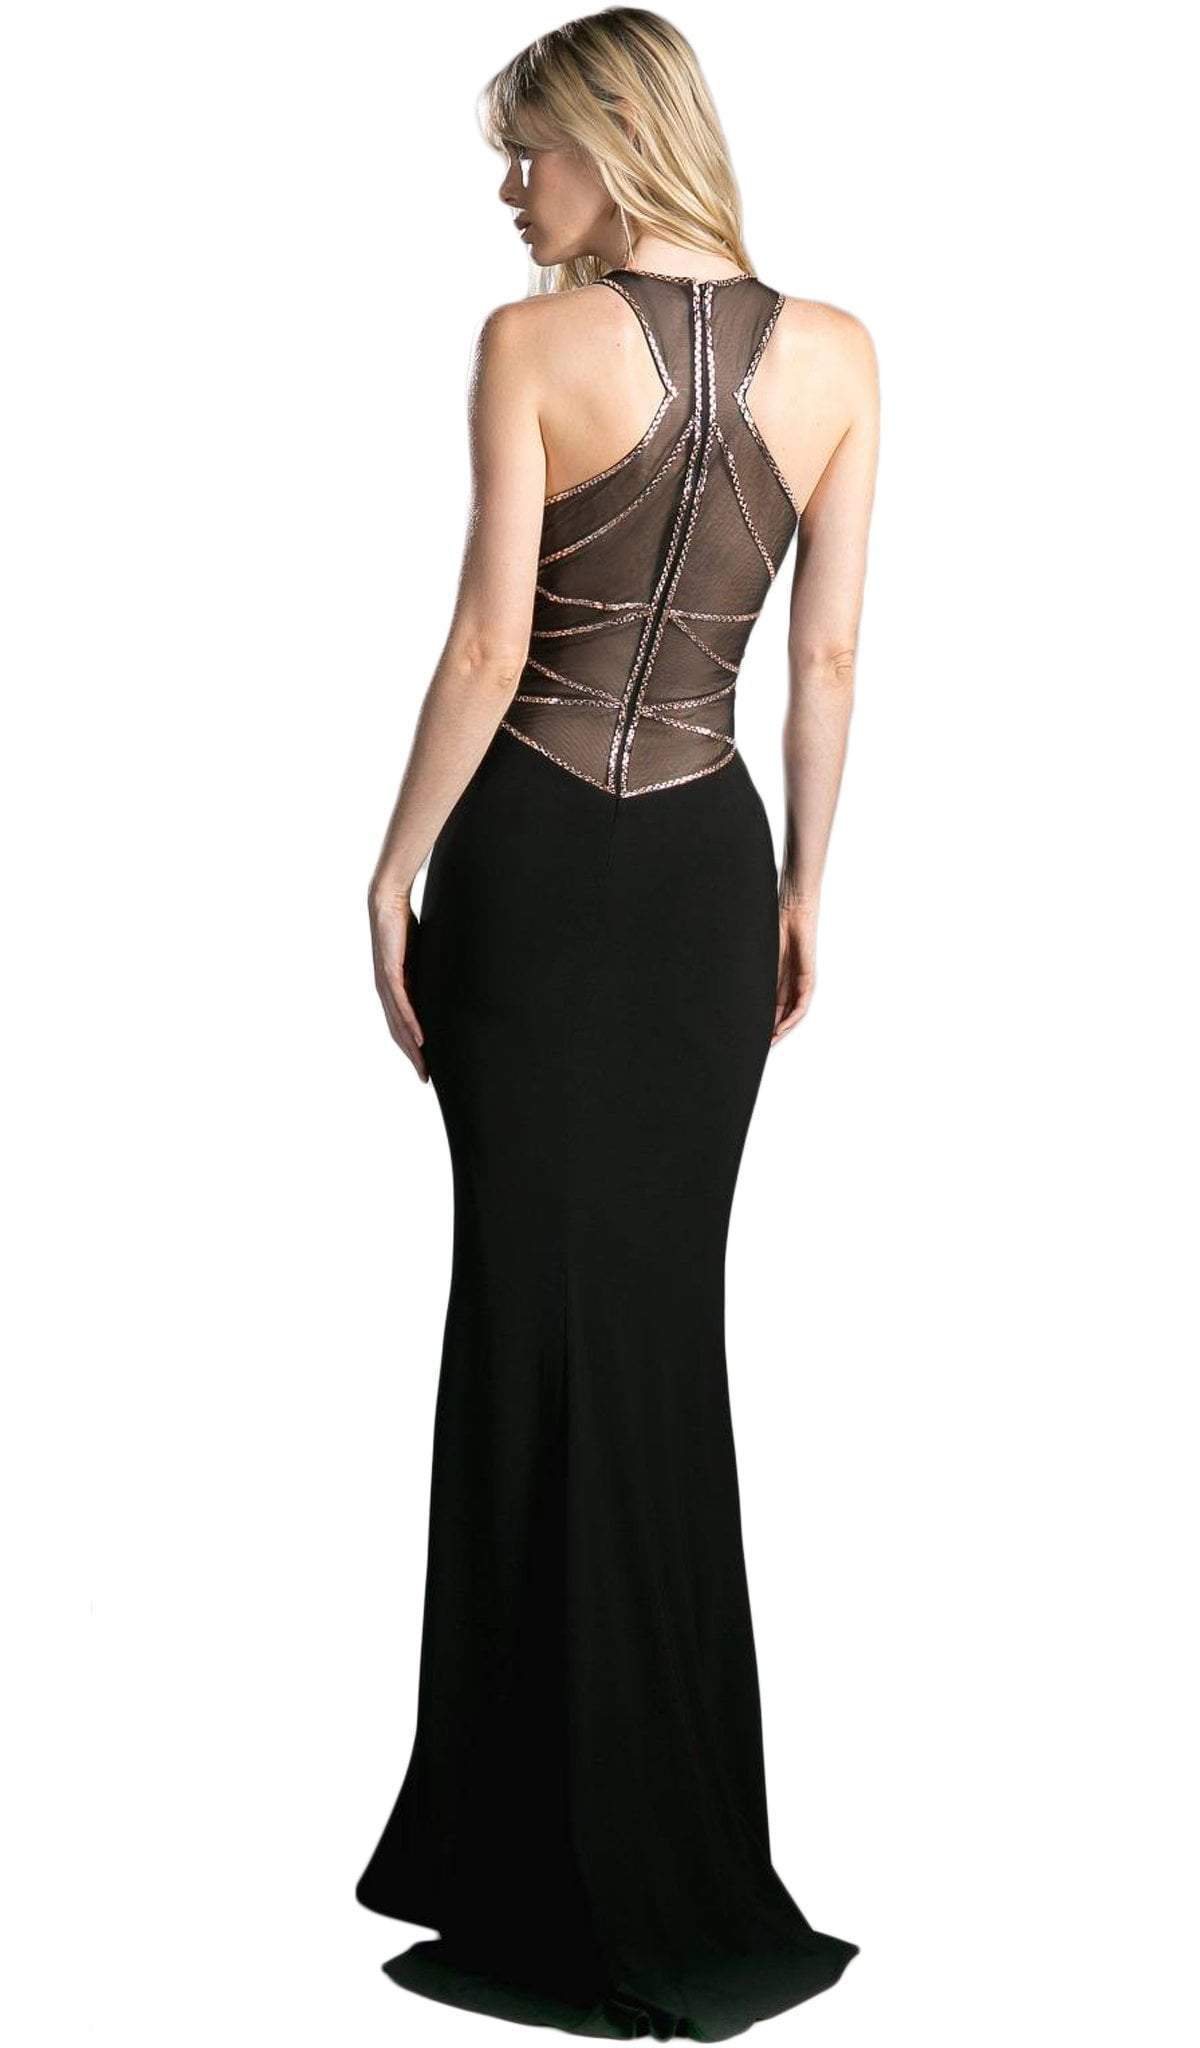 Cinderella Divine - Sleeveless Illusion Beaded Sheath Evening Gown Special Occasion Dress